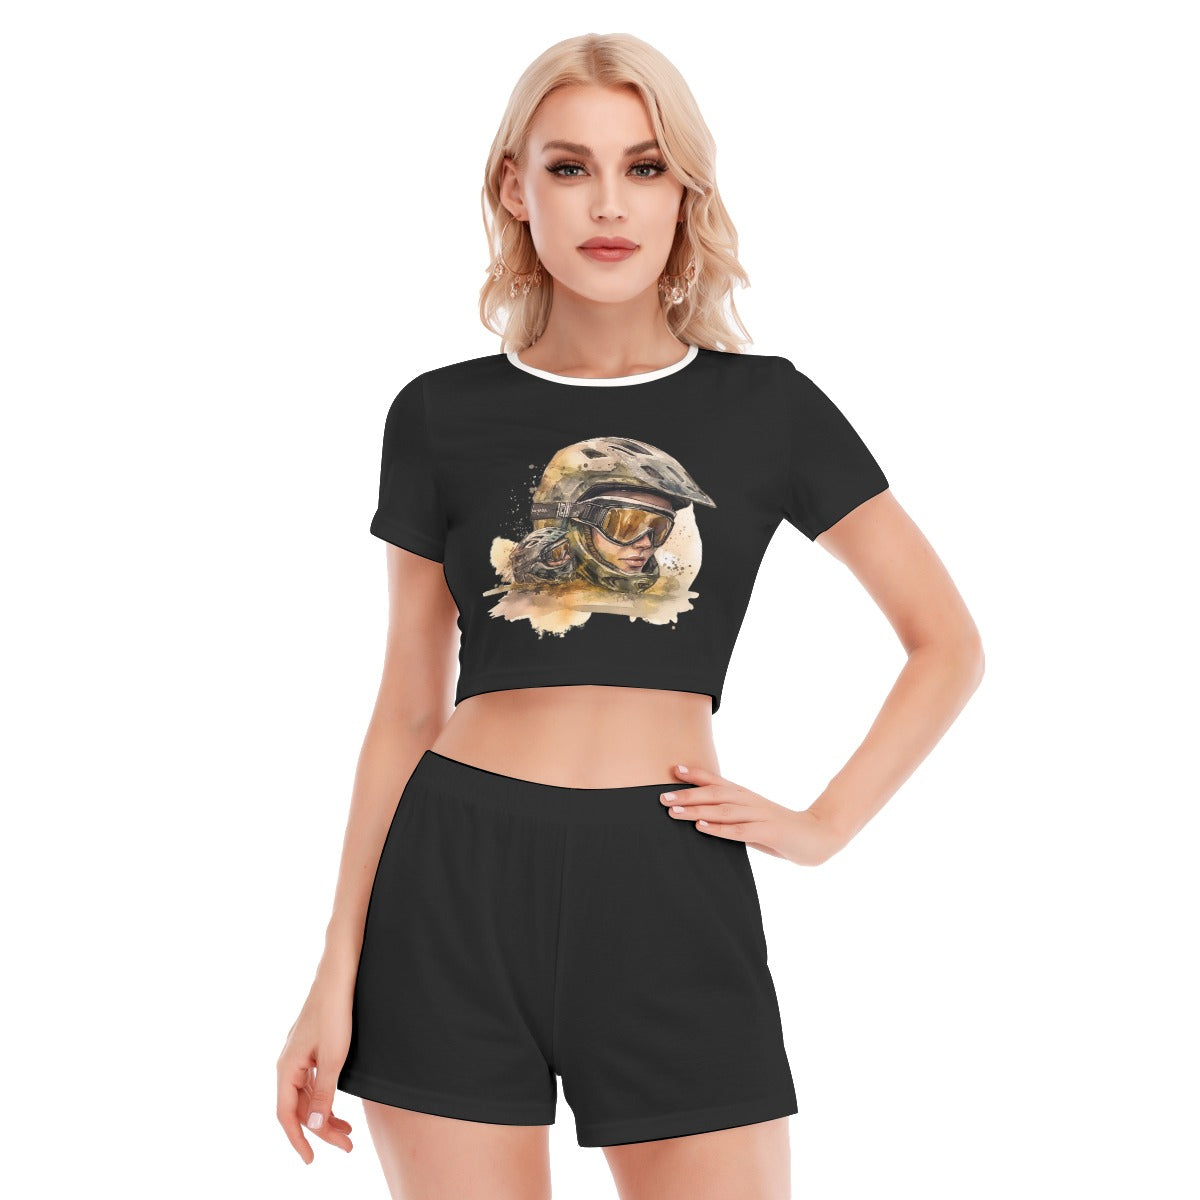 All-Over Print Women's Short Sleeve Cropped Top Shorts Suit